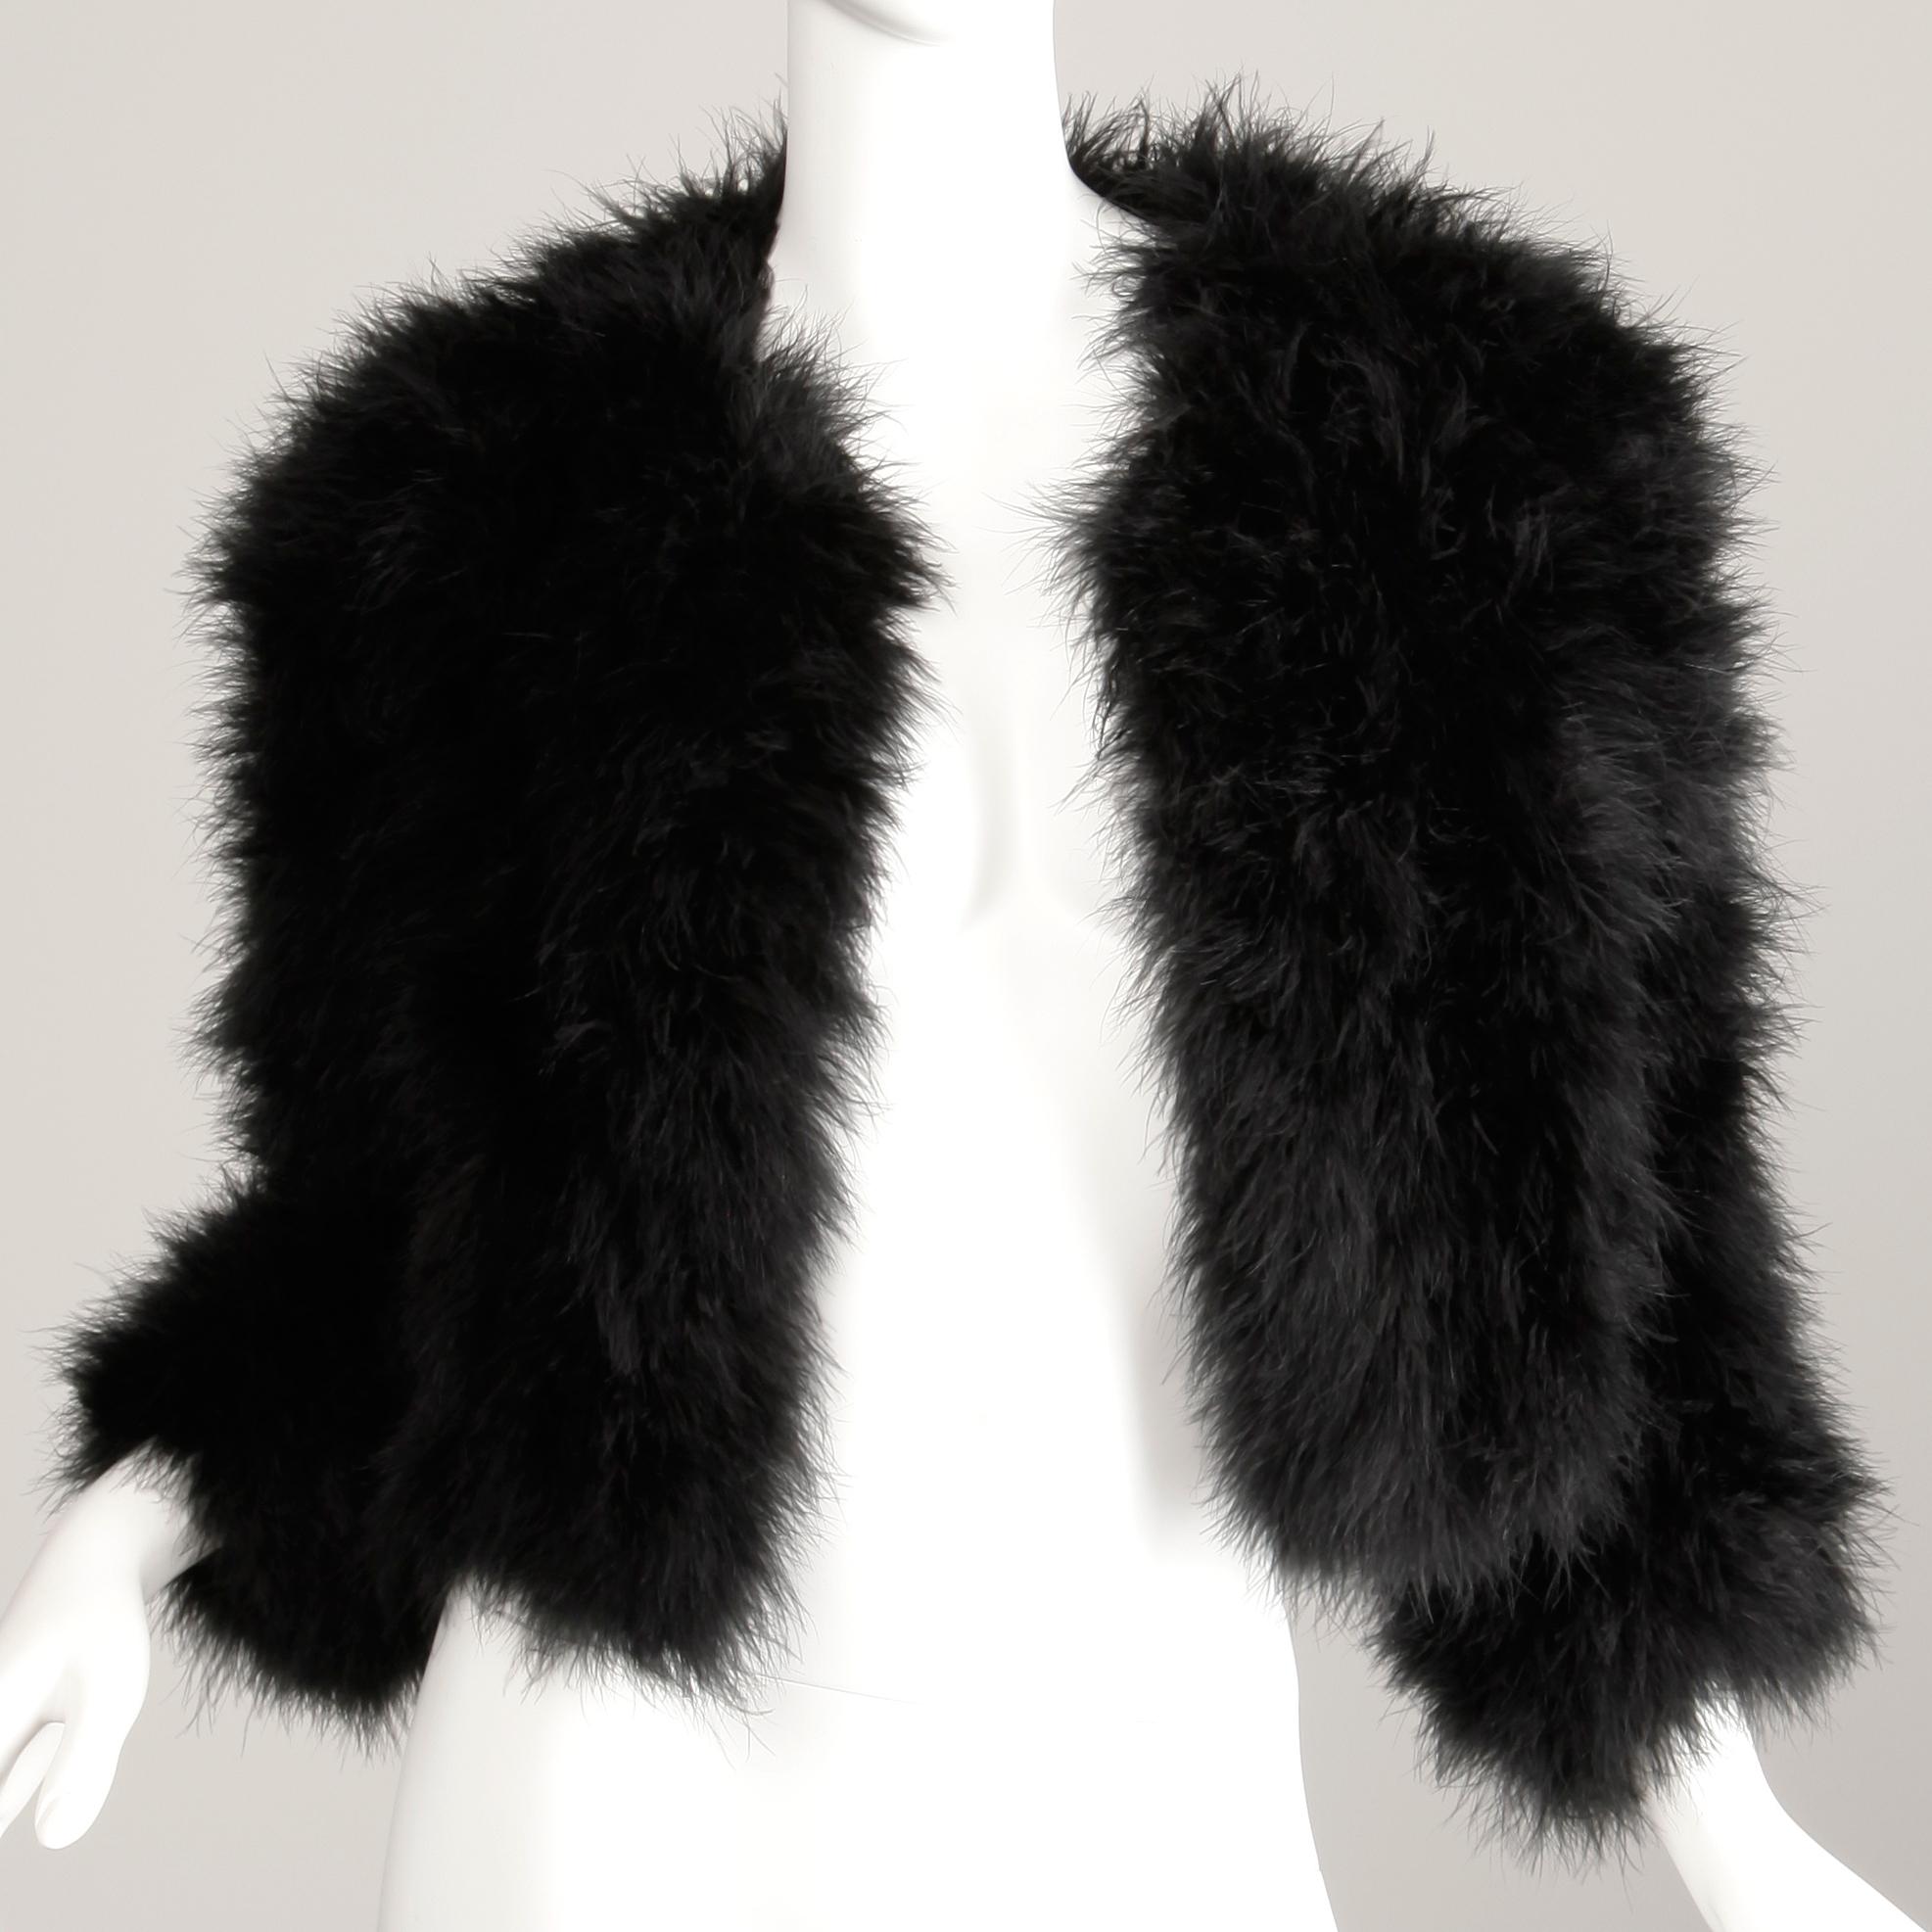 Gorgeous vintage 1980s black marabou feather jacket by Adrienne Landau. Unlined with front hook closure. 100% Marabou feathers. The marked size is 